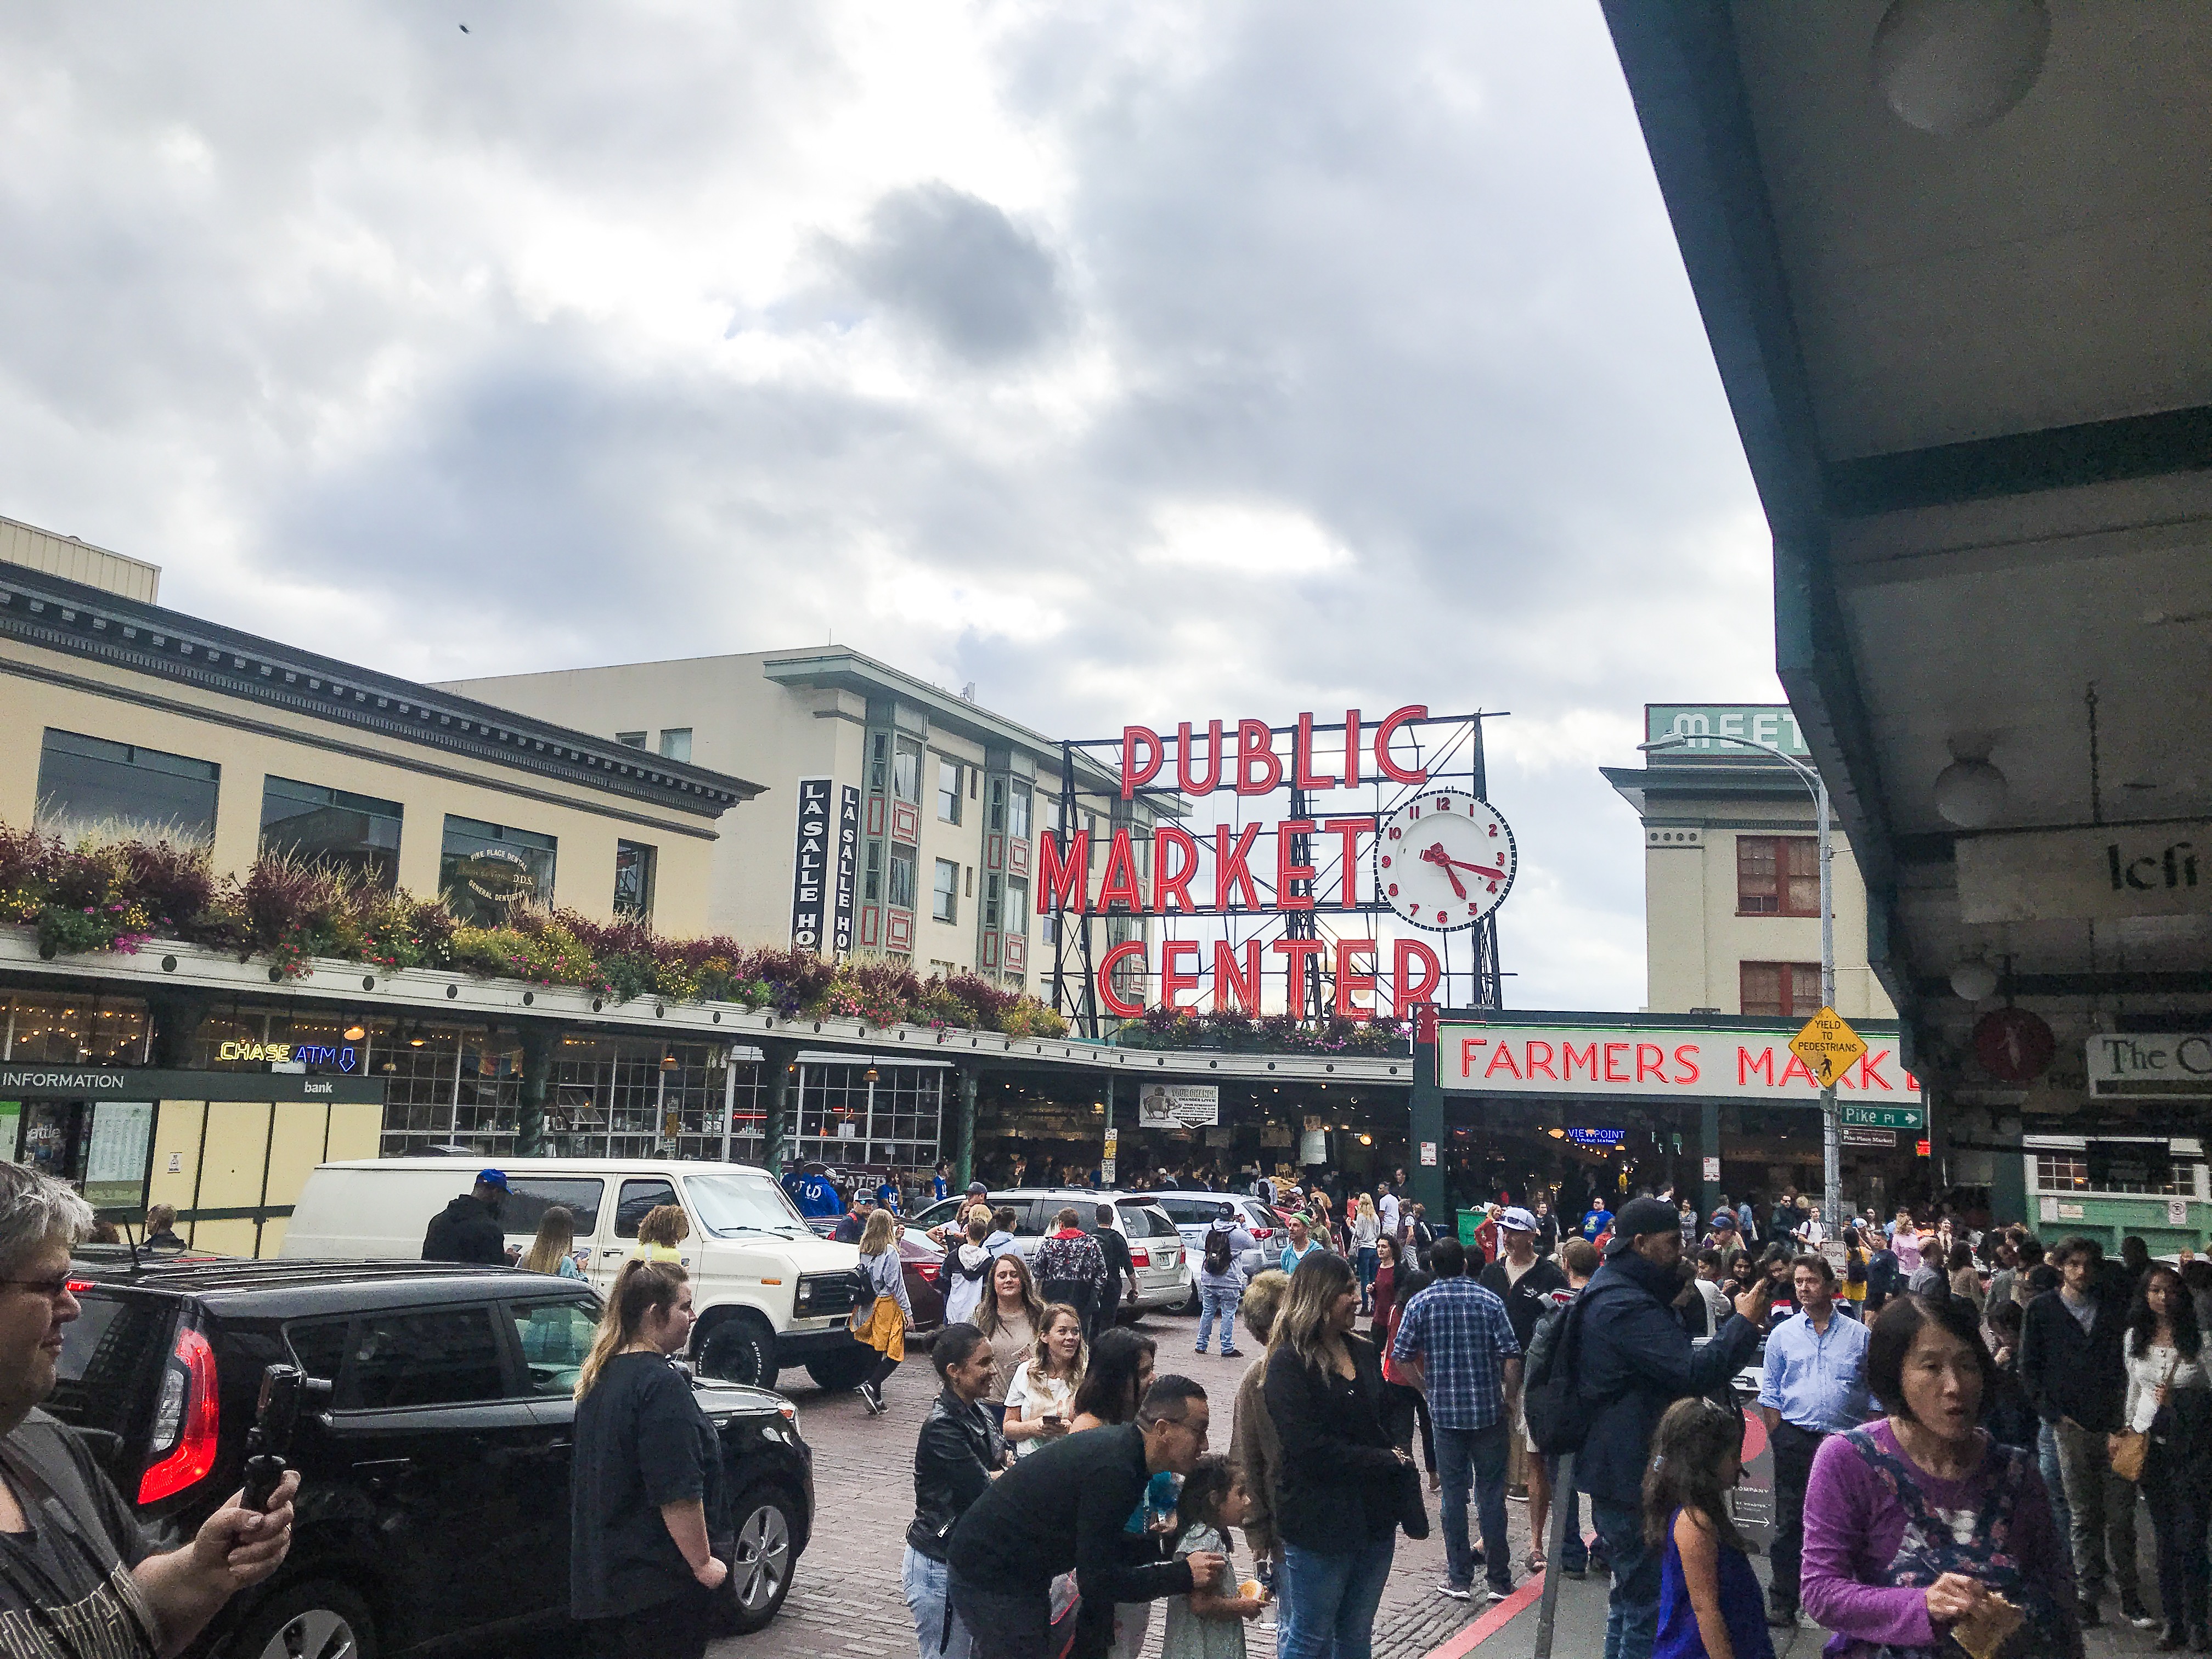 Seattle Travel Guide - Where to go, what to eat, and places to skip // Guide for a Couple's Trip to Seattle - ew & pt